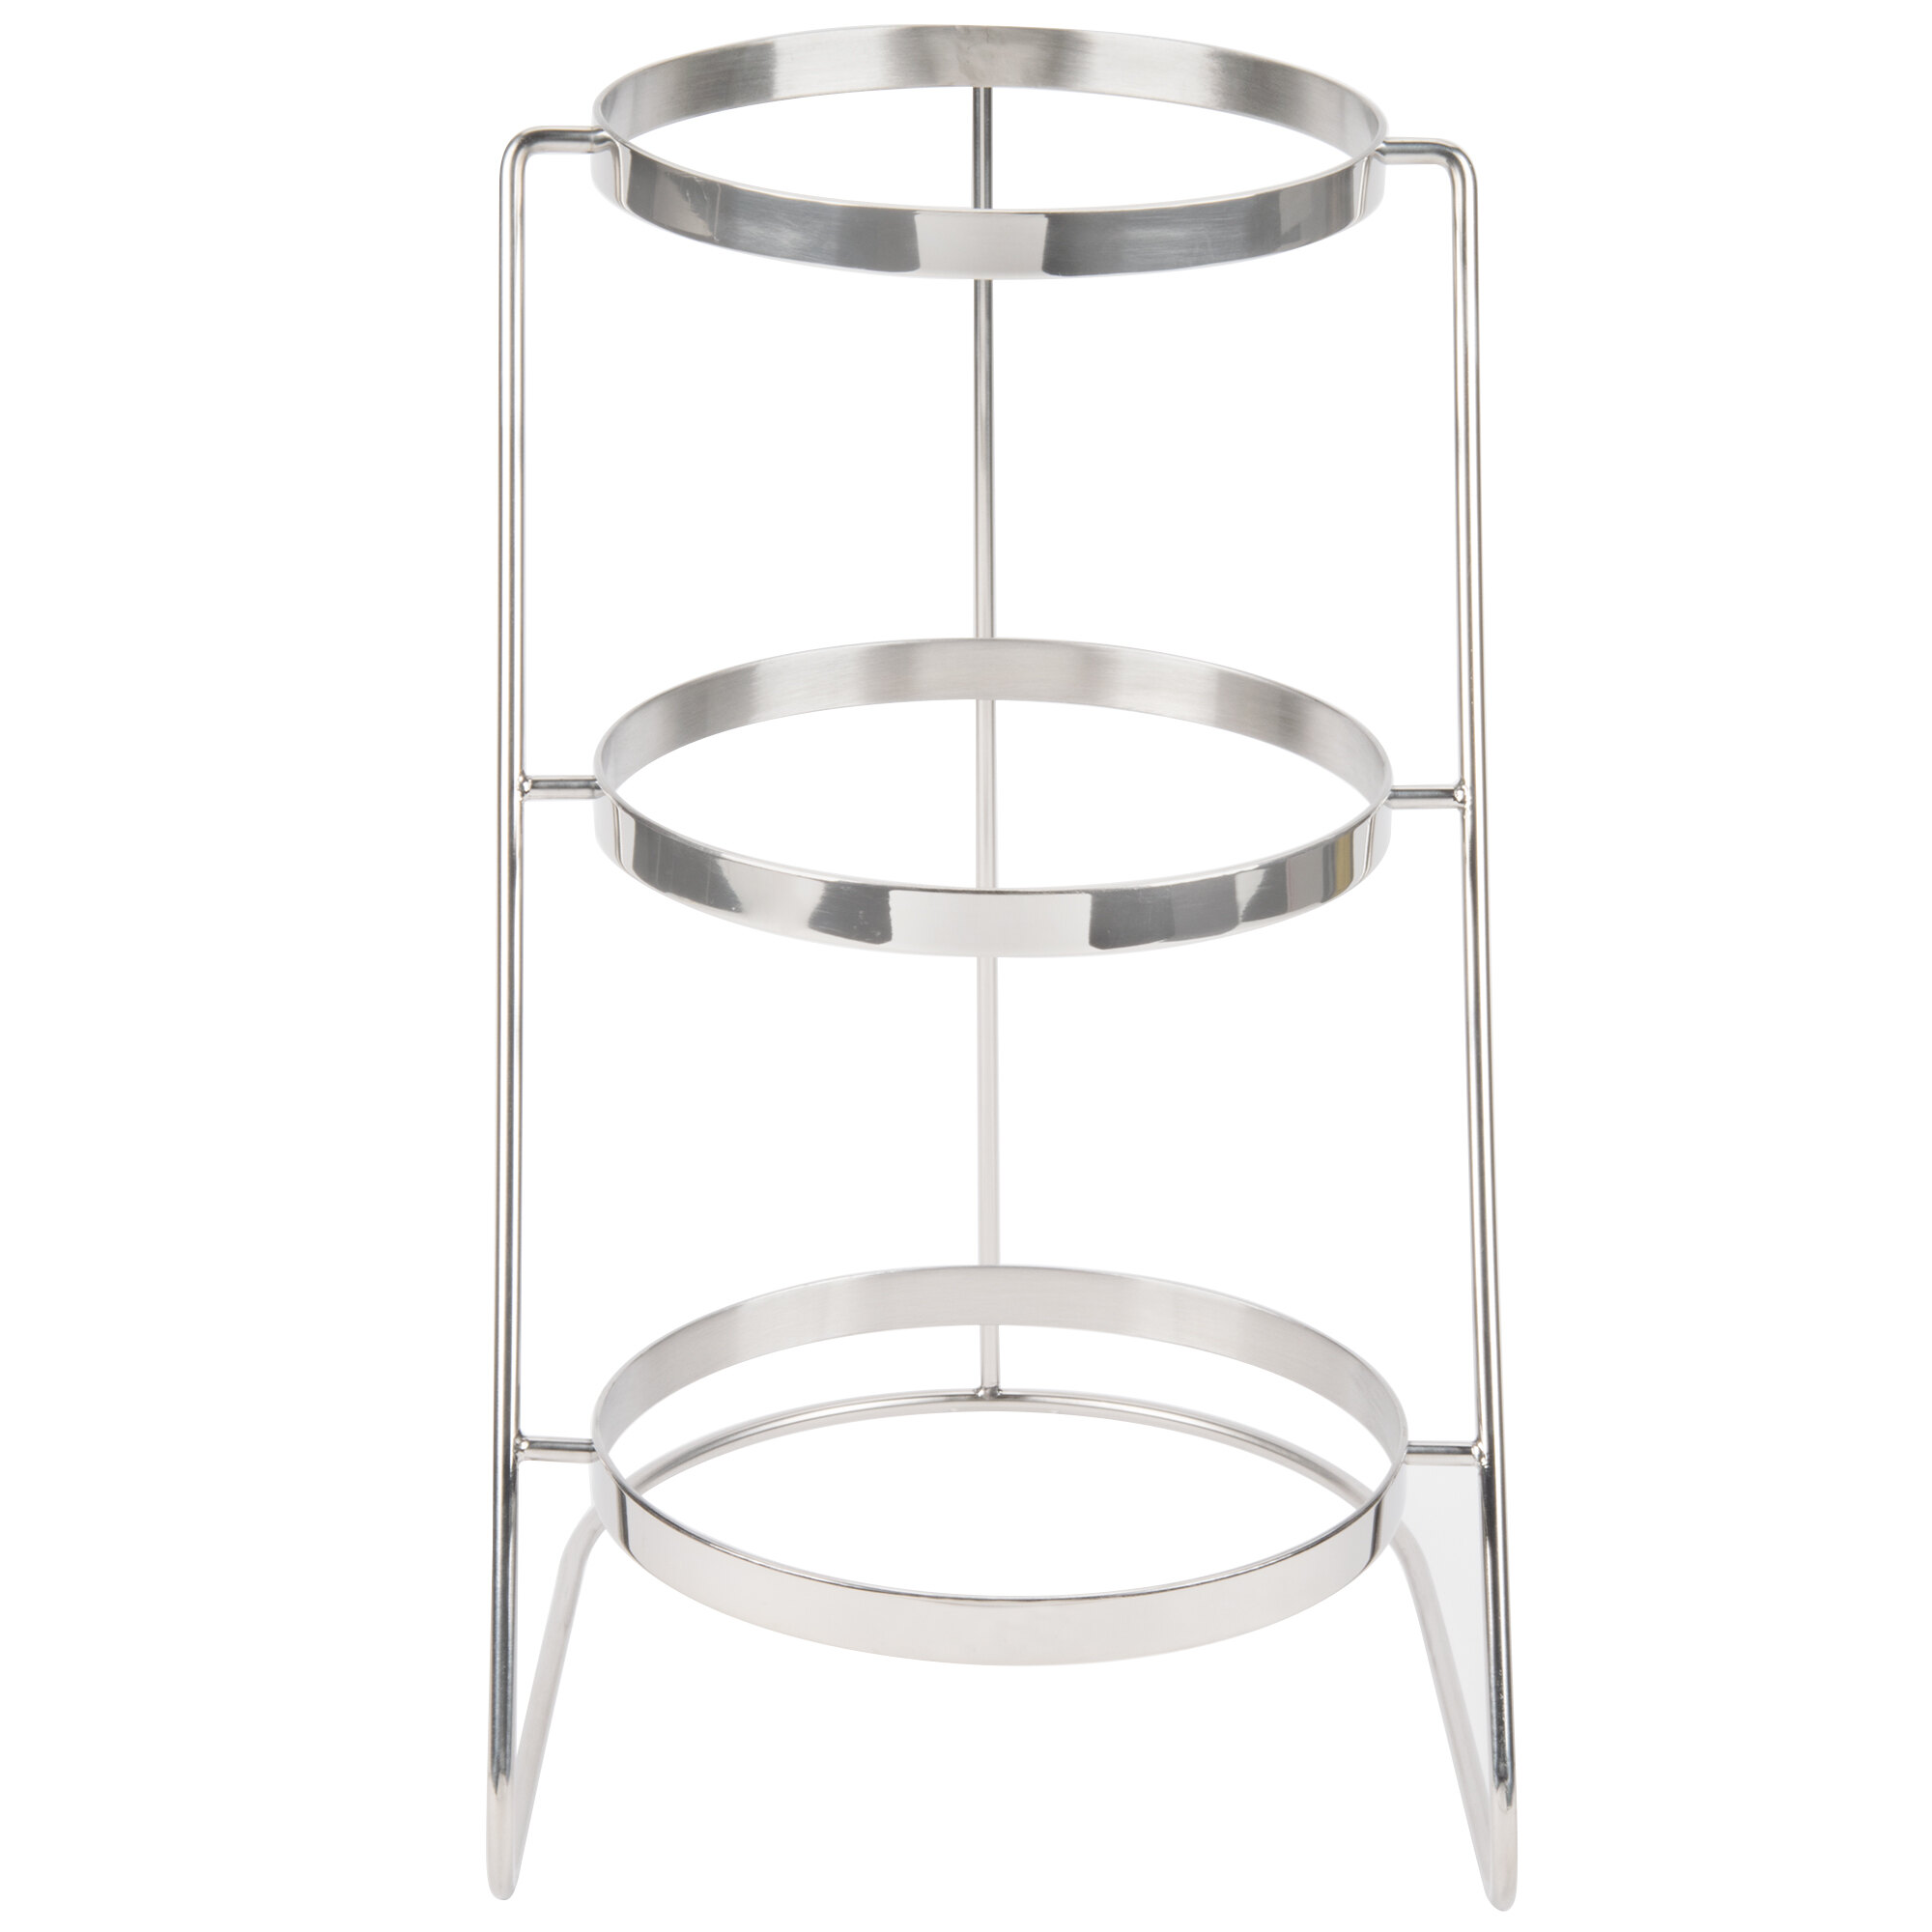 GET MTS-029 3 Tier Cascading Stainless Steel Display Stand - 11 1/4